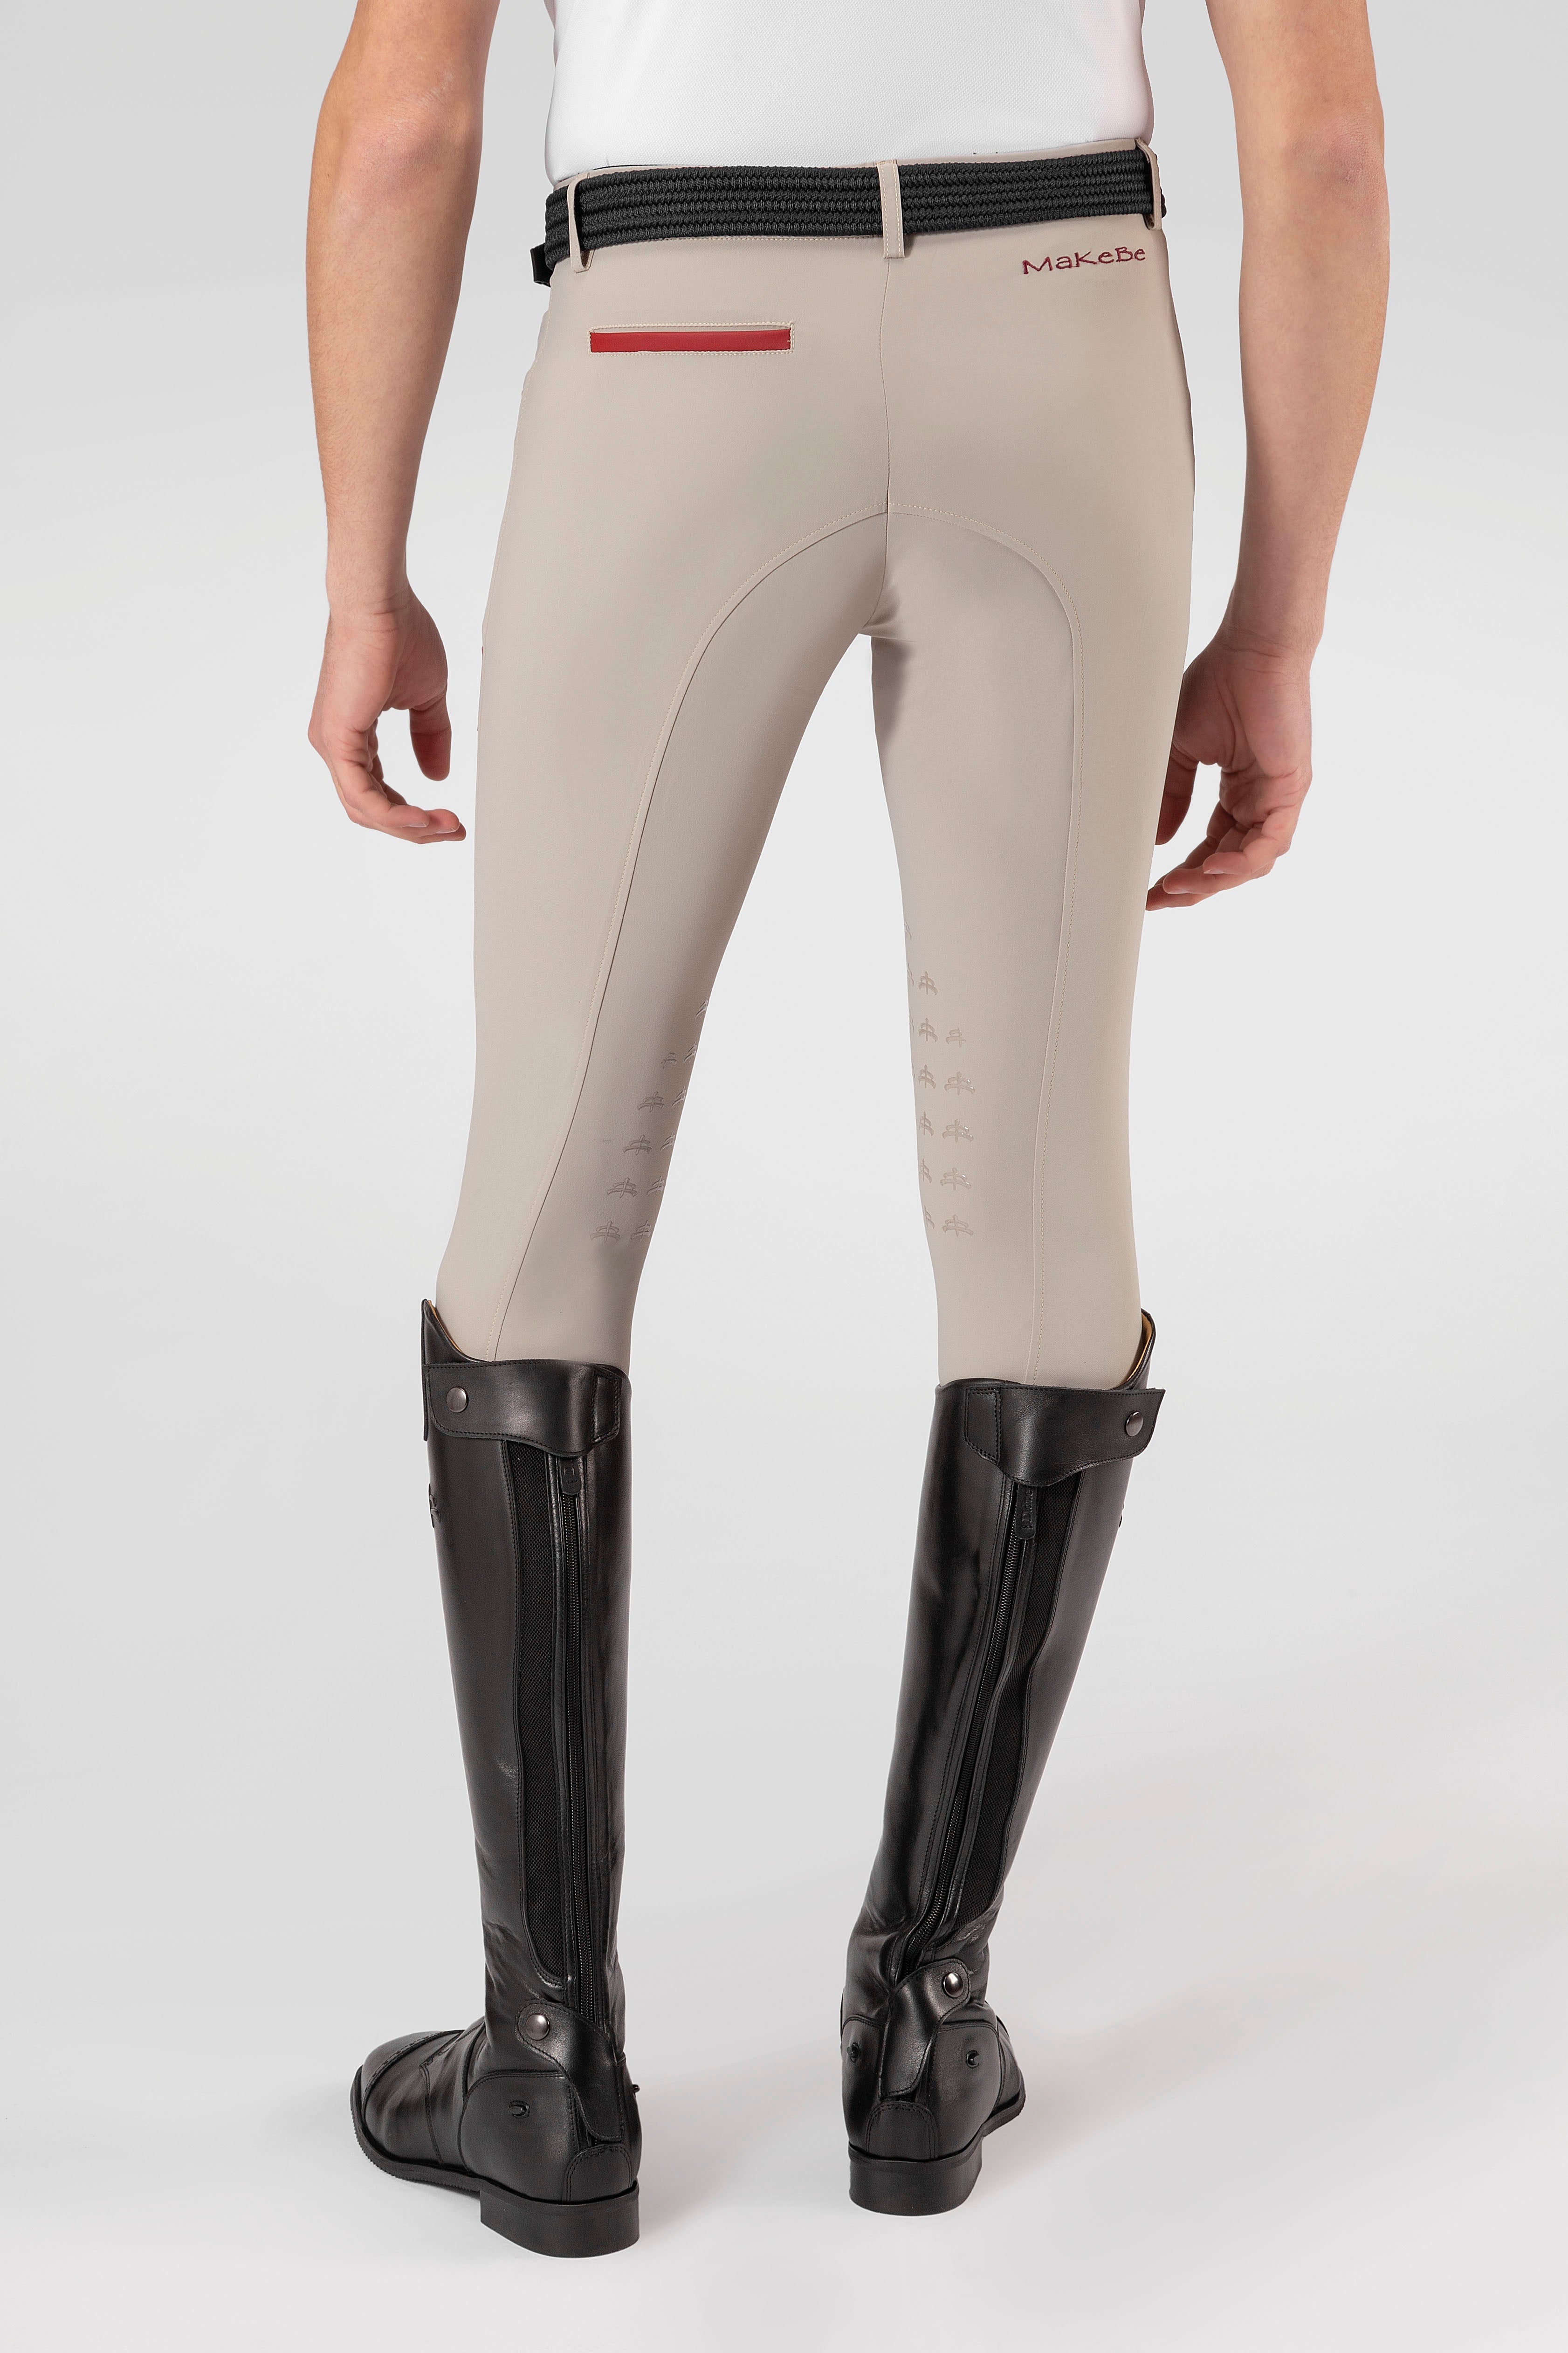 Makebe Italy Lord Men's Breeches w/ Gel Grip - Equiluxe Tack